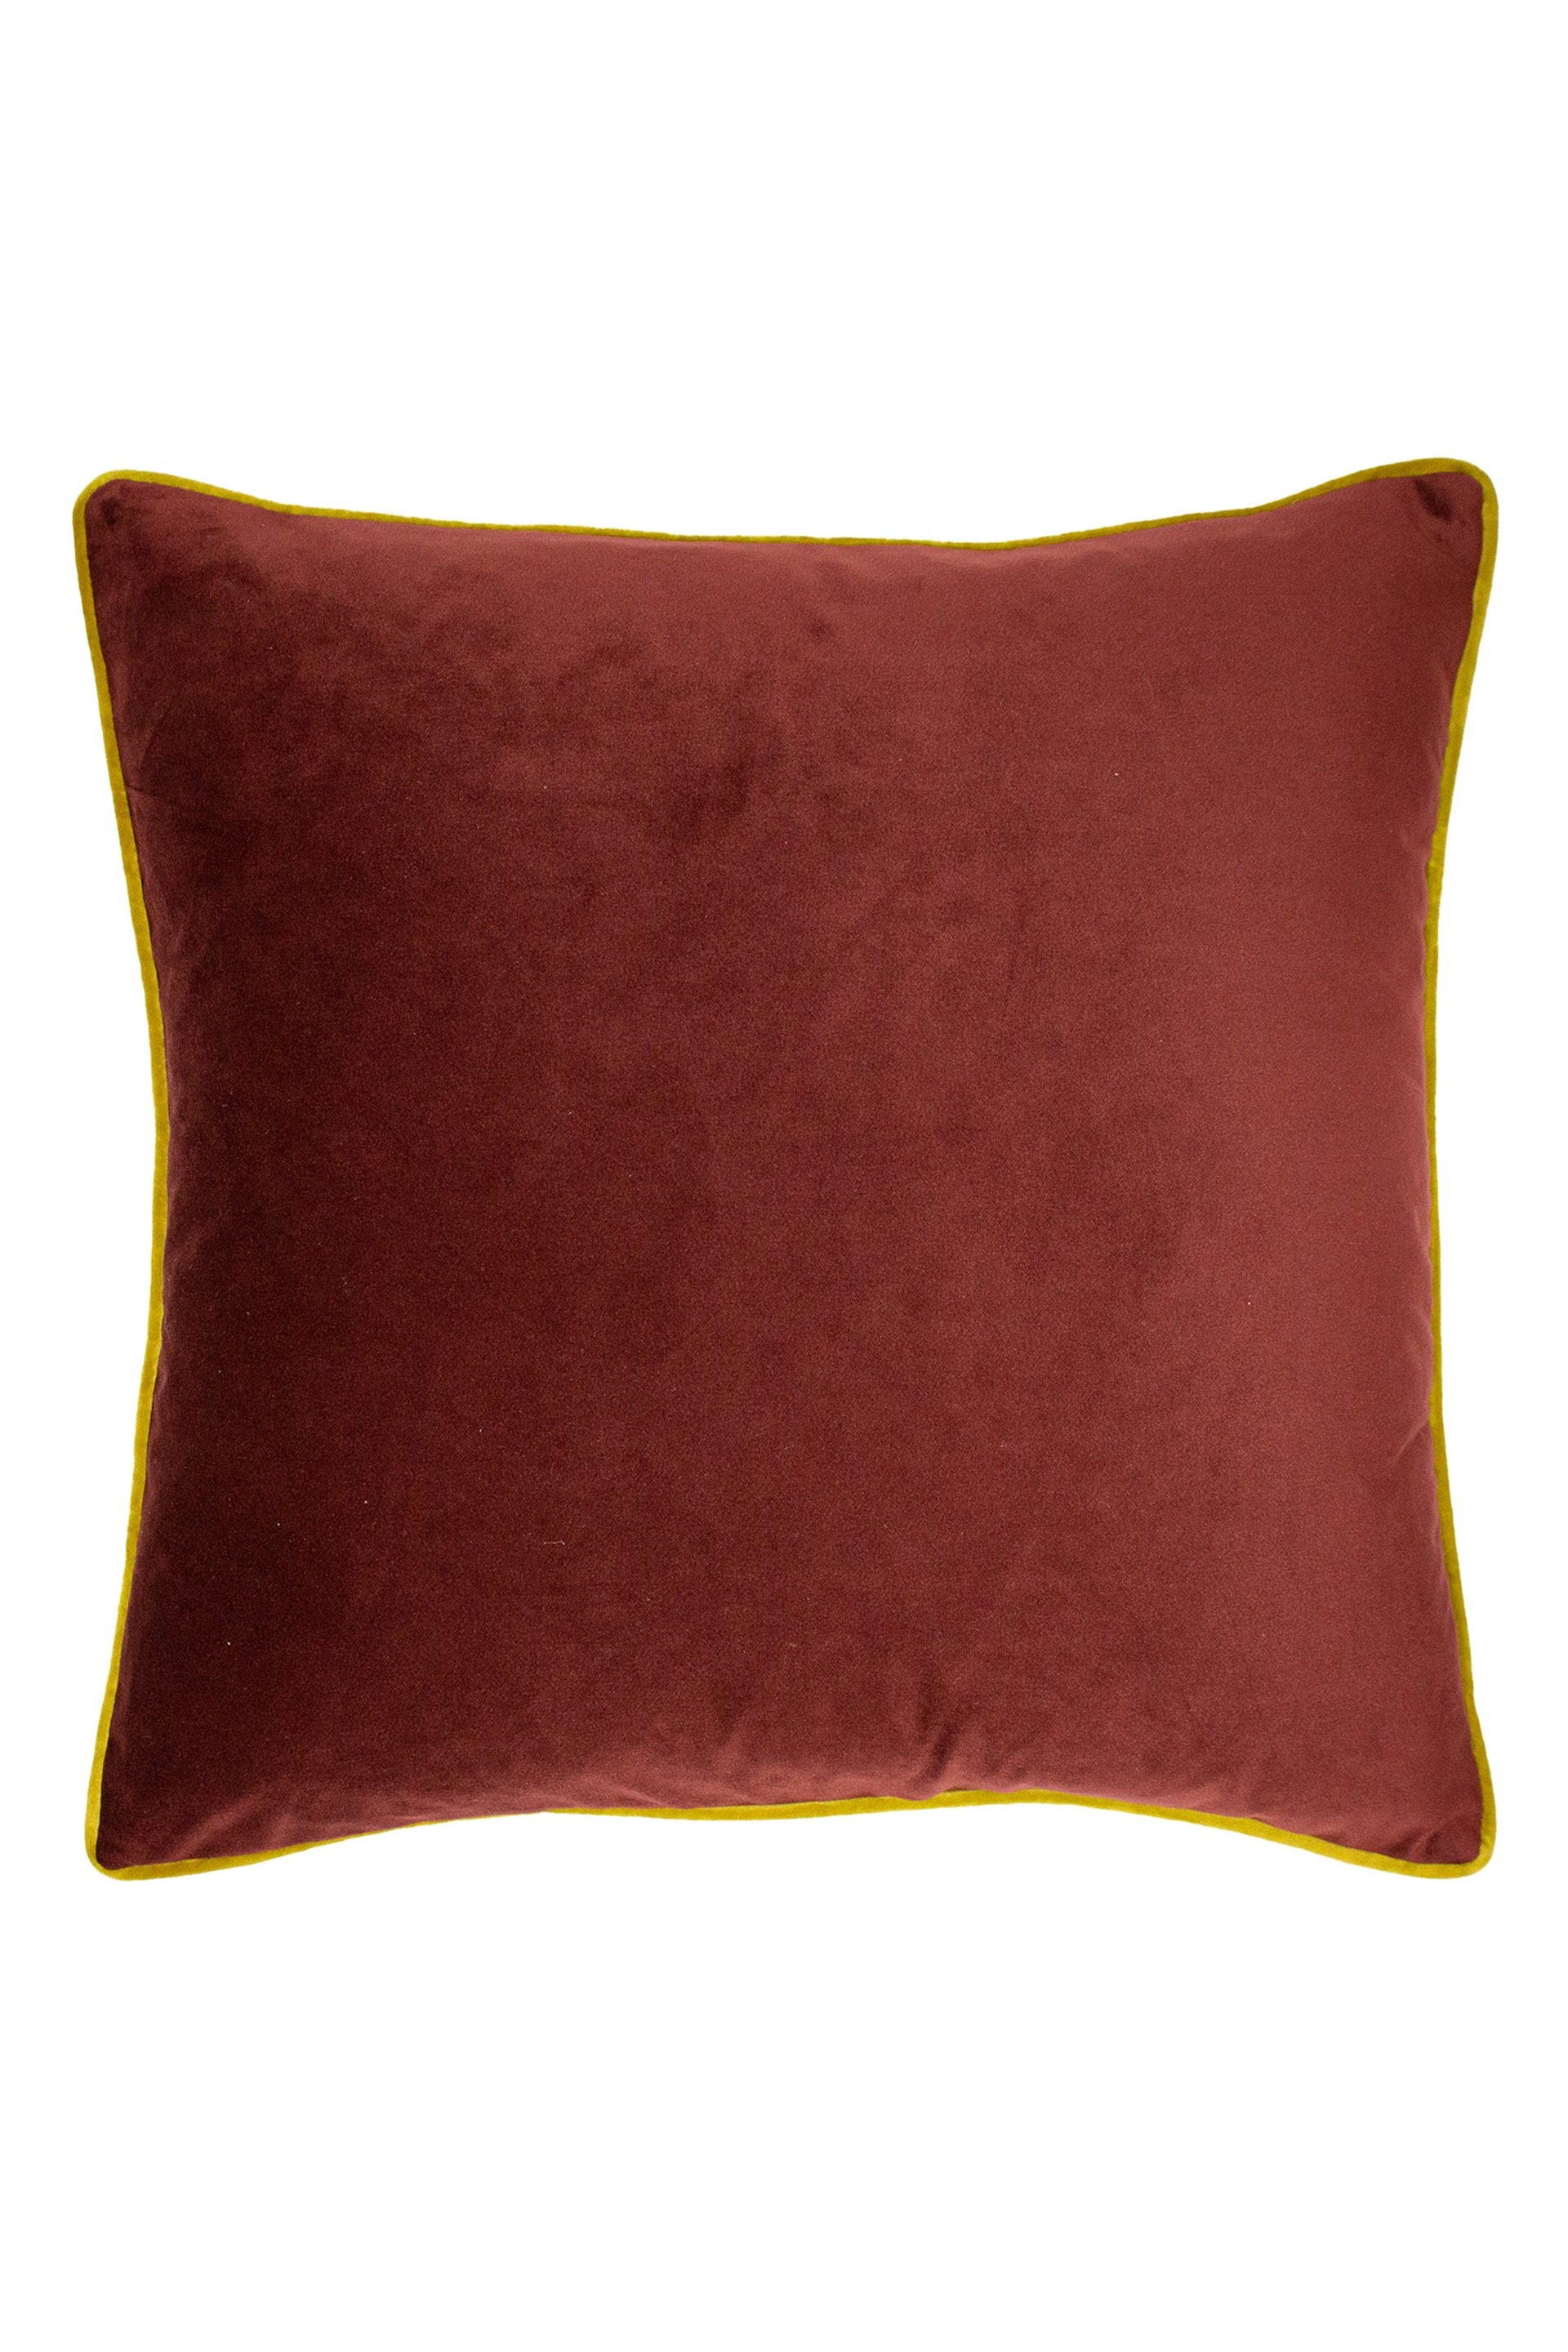 furn. Burgundy Red/Gold Forest Fauna Embroidered Polyester Filled Cushion - Image 3 of 5